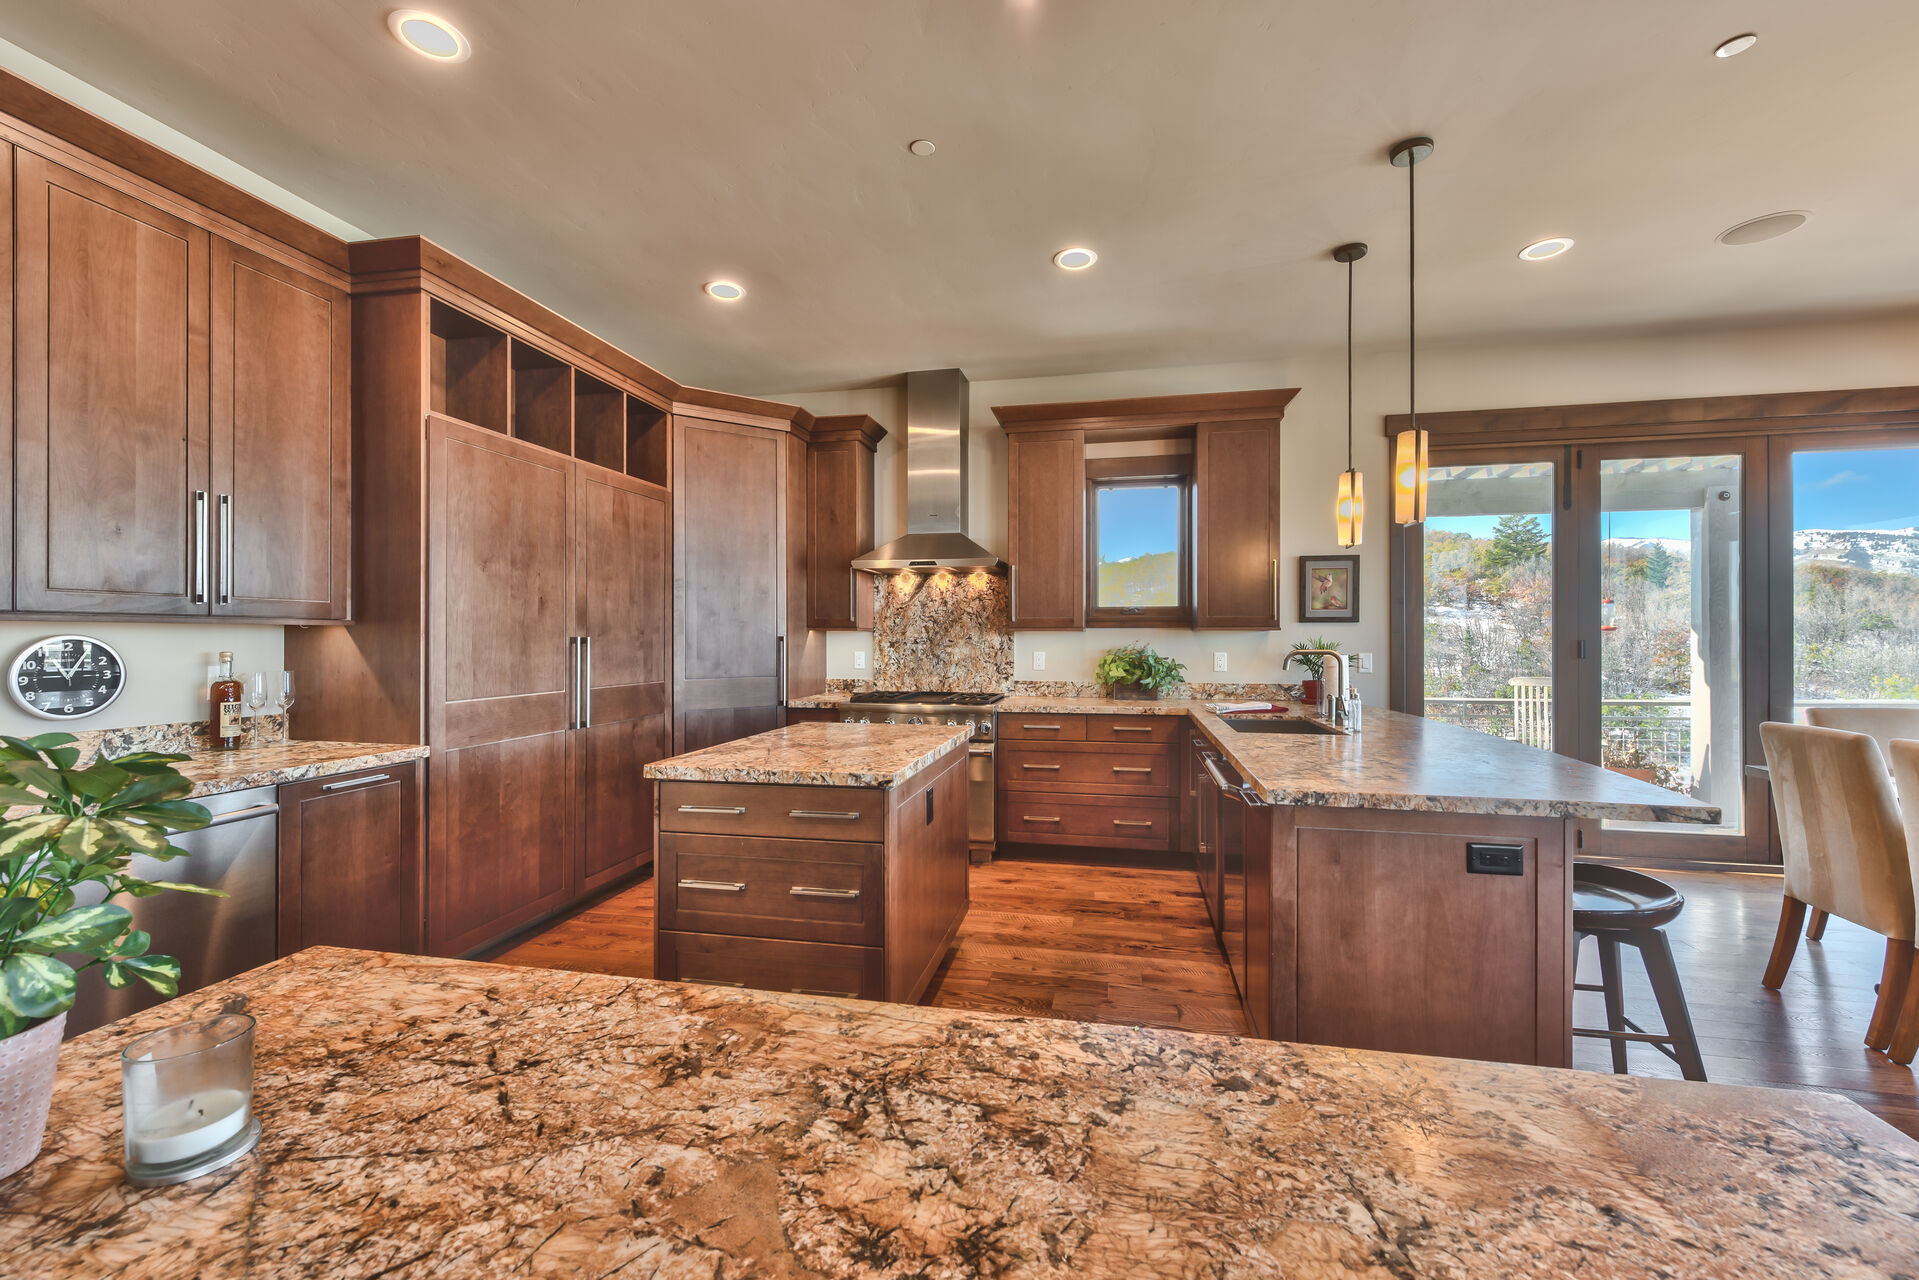 Fully Equipped Gourmet Kitchen with Two Sinks and Dishwashers, and Plenty of Prep Space